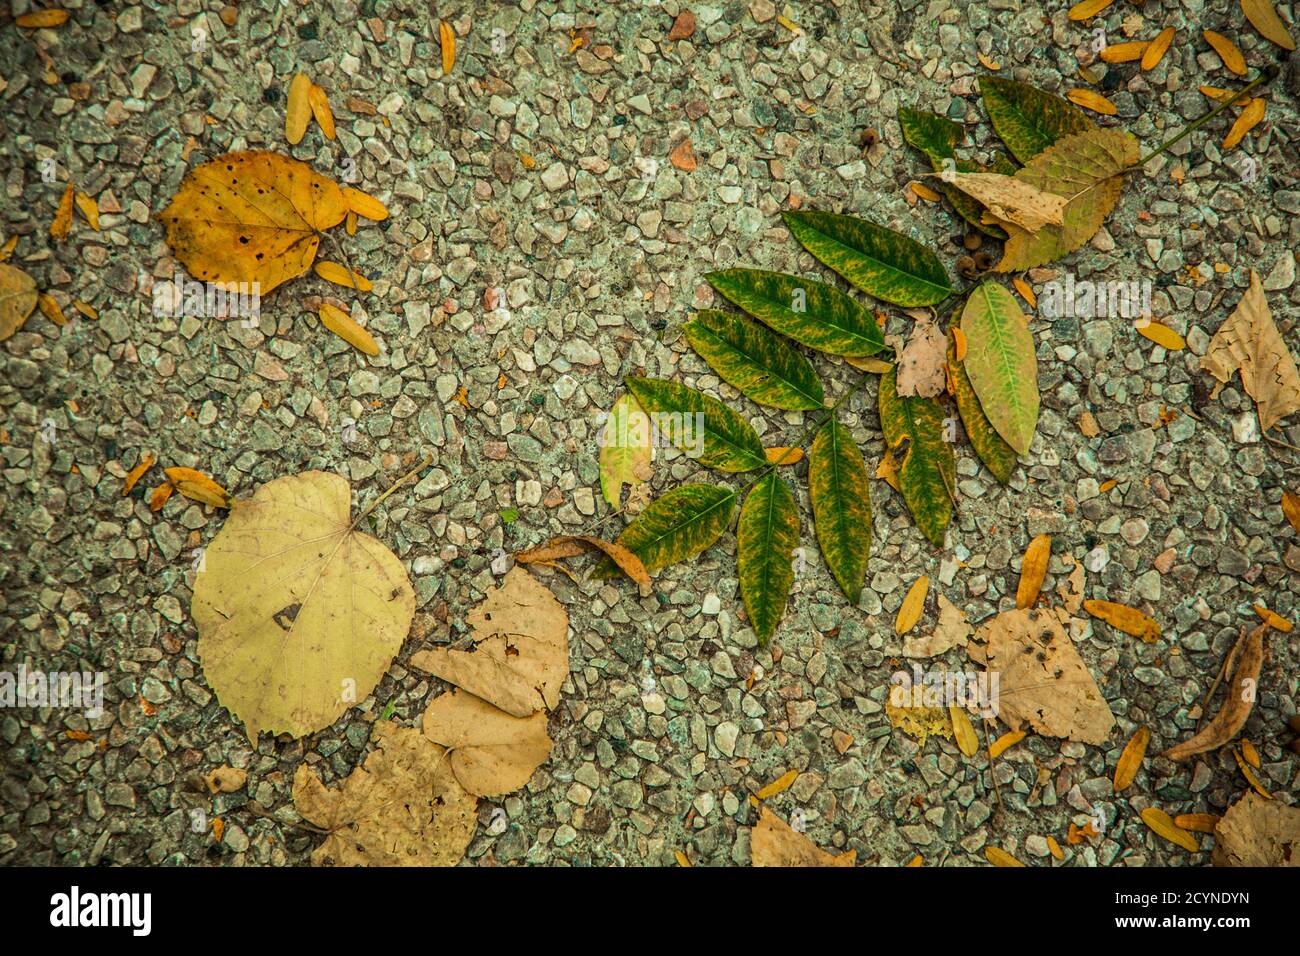 Autumn leaves background /  Dry leaves fallen to the ground in the park, natural condition Stock Photo